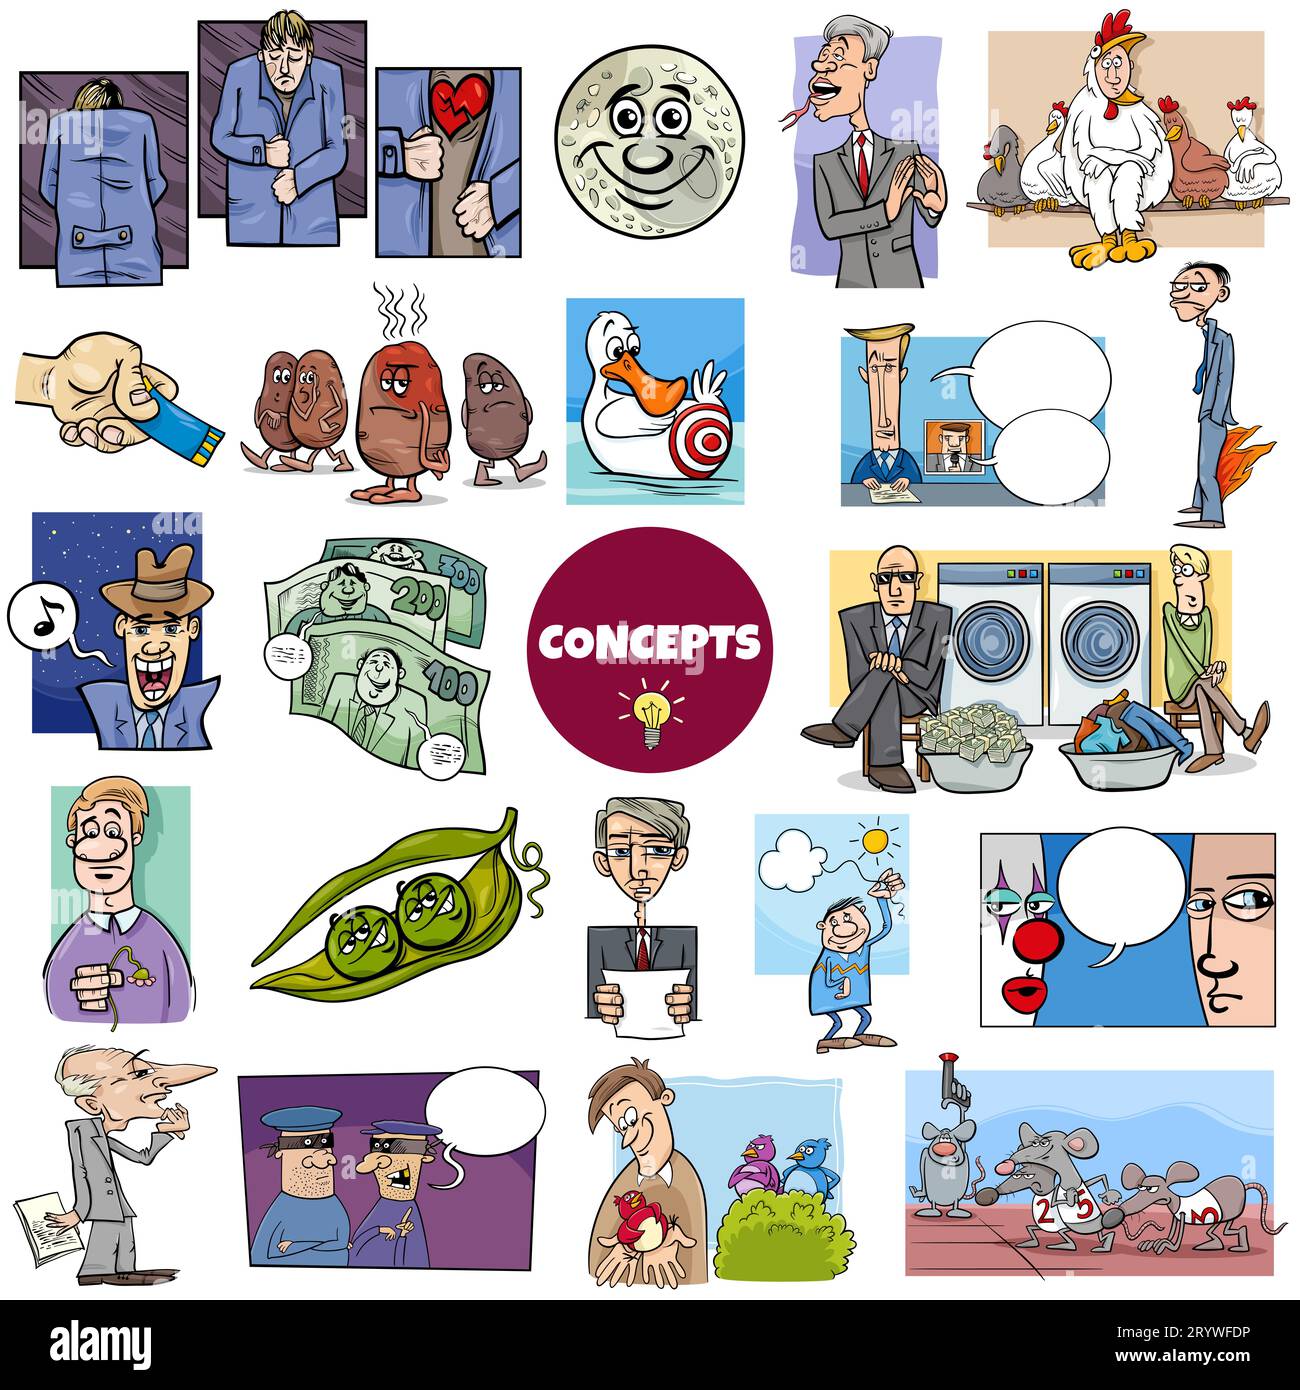 Illustration big set of humorous cartoon concepts or metaphors and ideas with comic characters Stock Photo